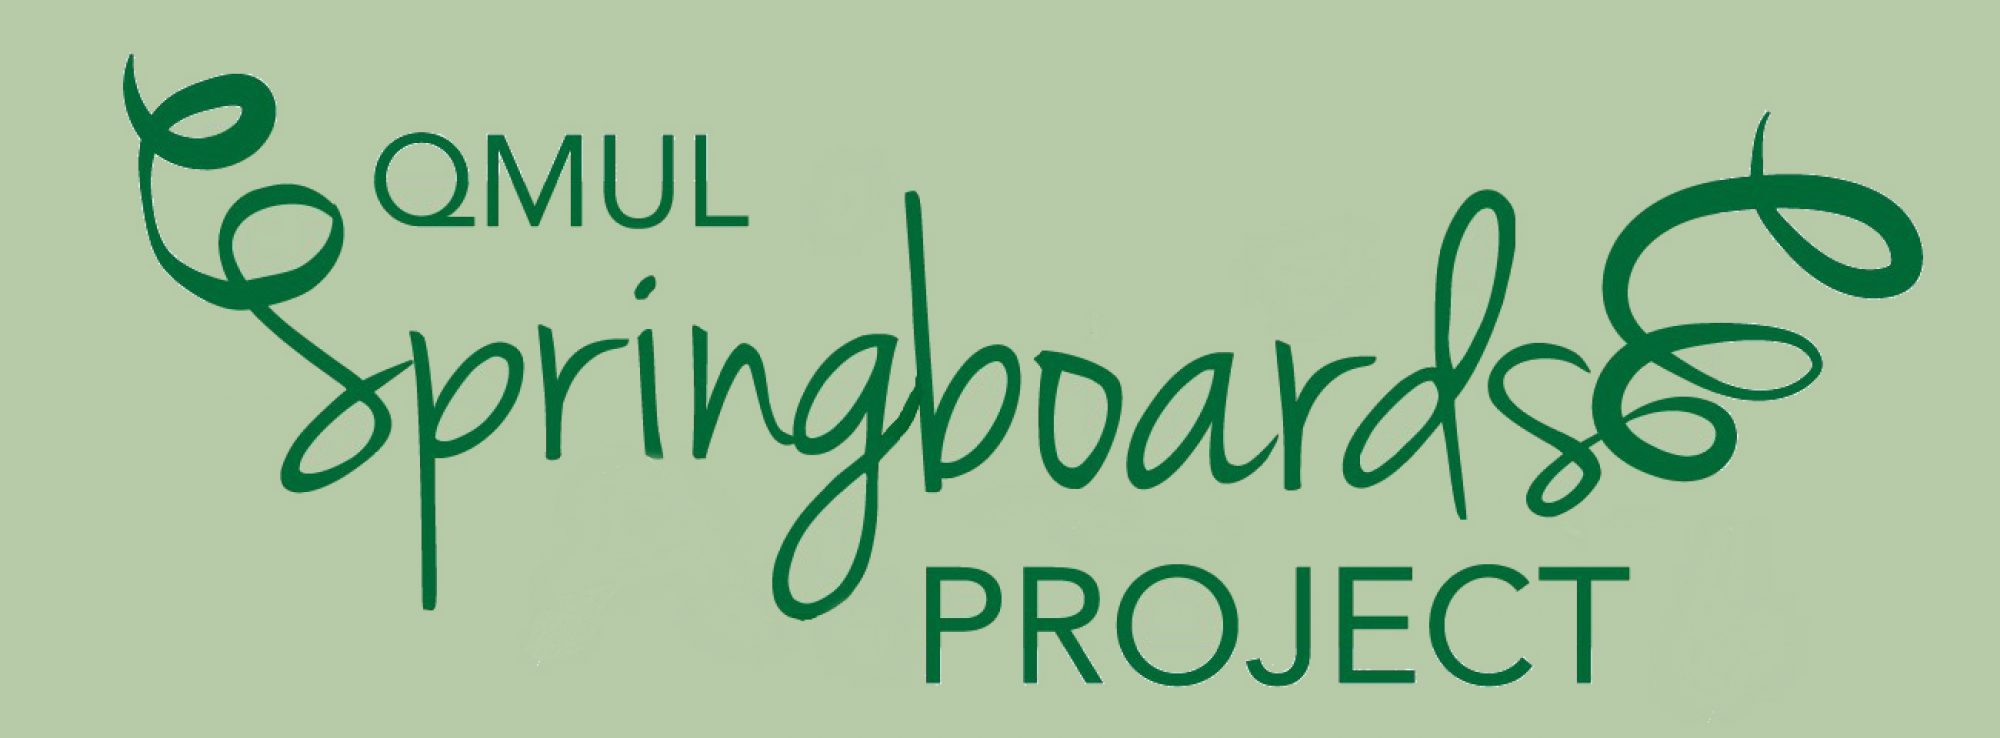 Springboards Project